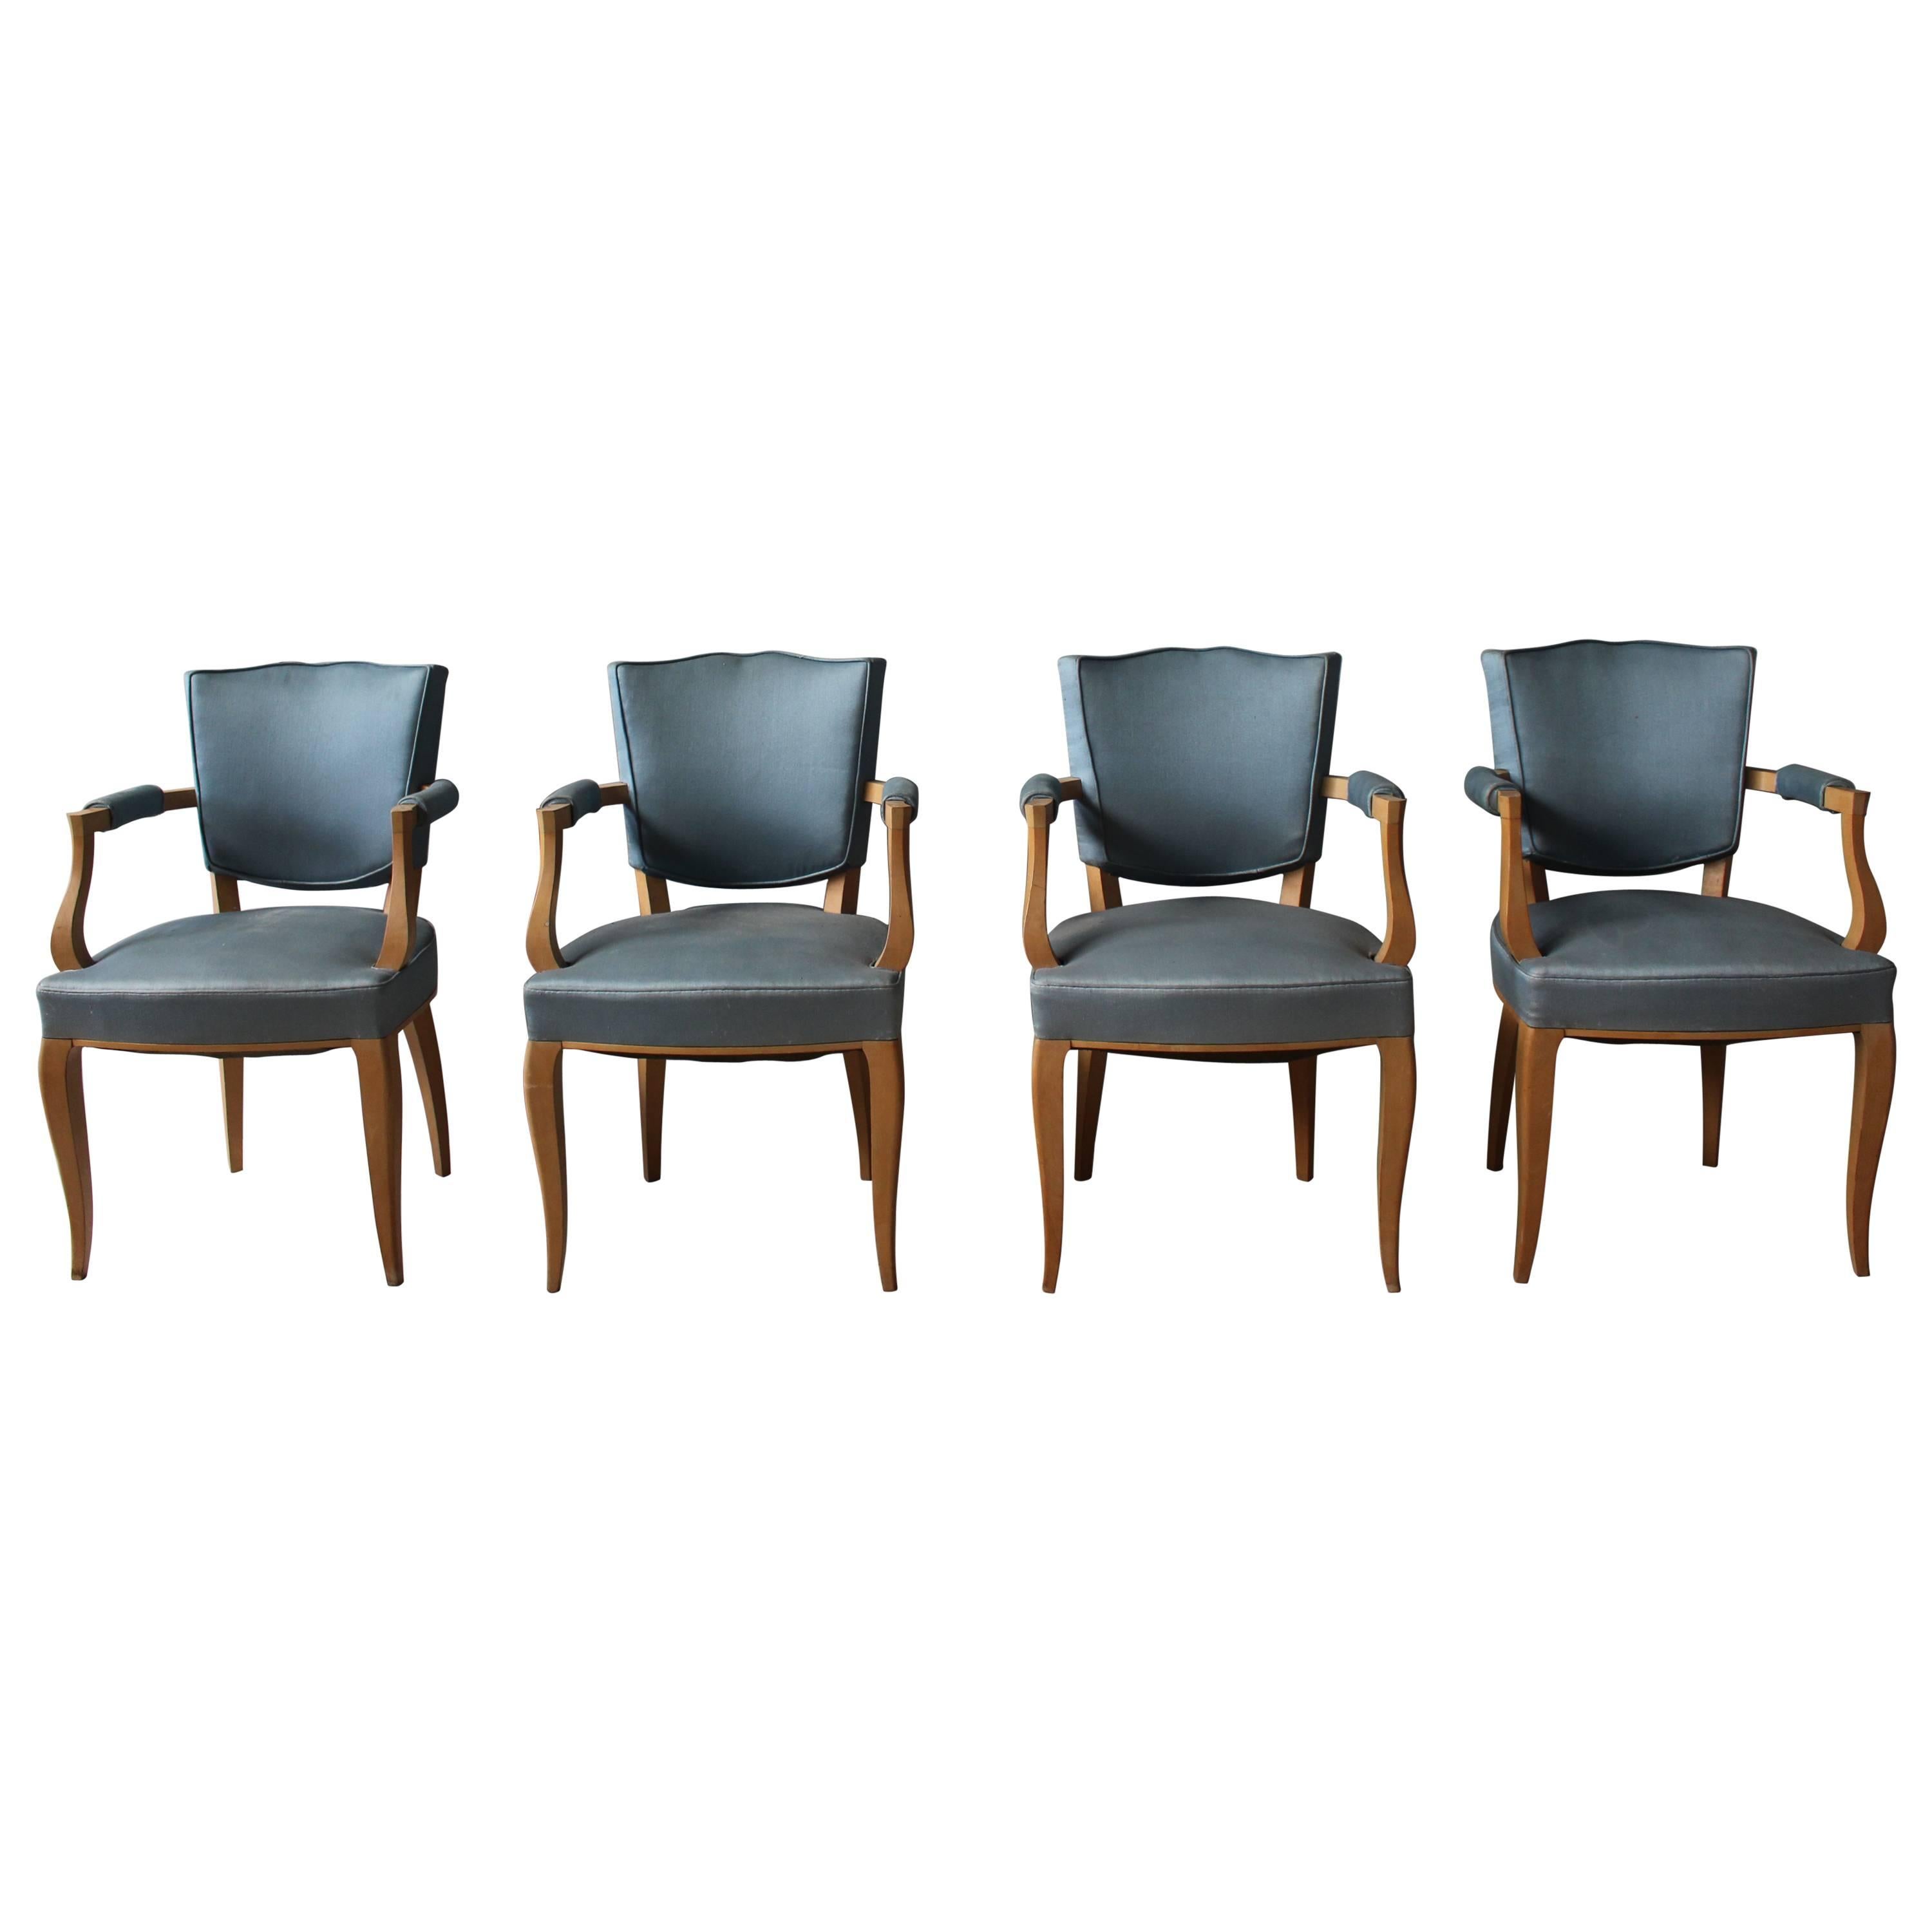 A Set of 4 Fine French Art Deco Sycamore Armchairs